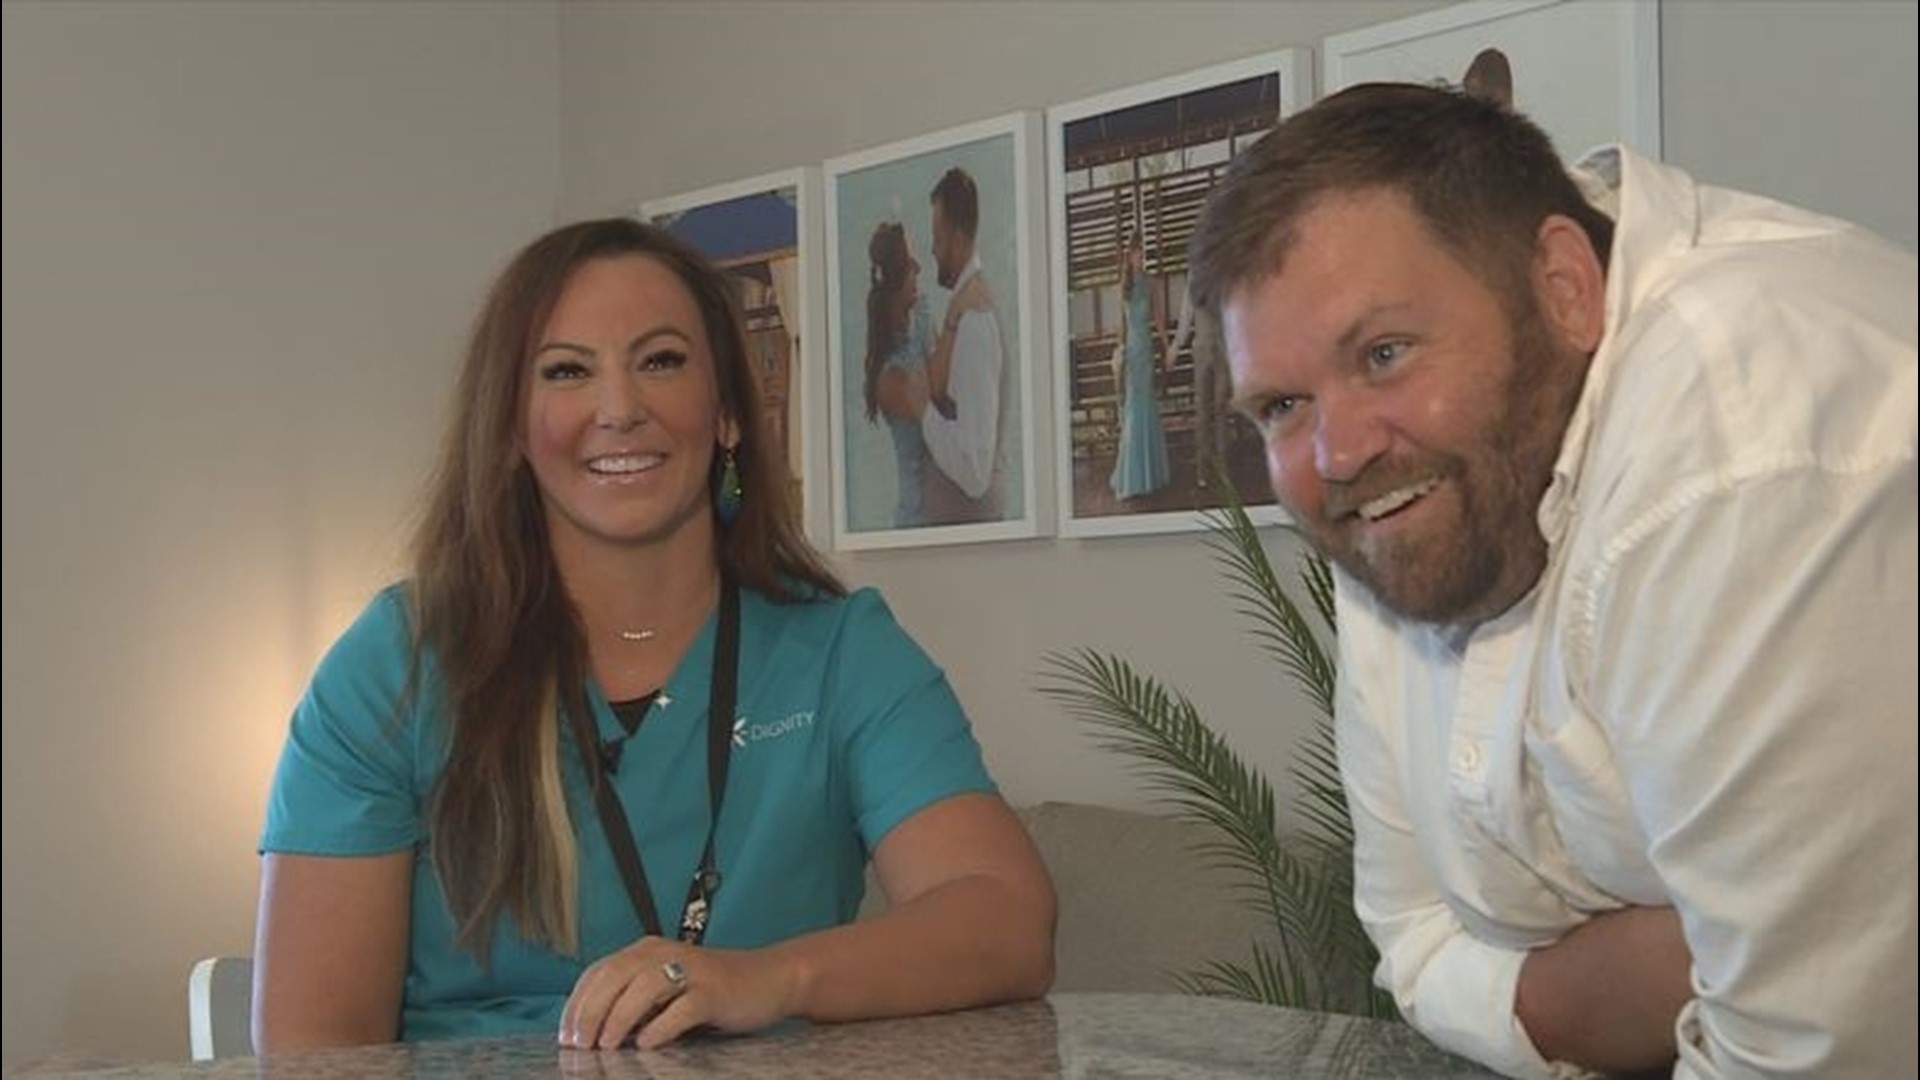 Carpenter and his wife Jamie Kocol open up on their journey in hopes of inspiring others